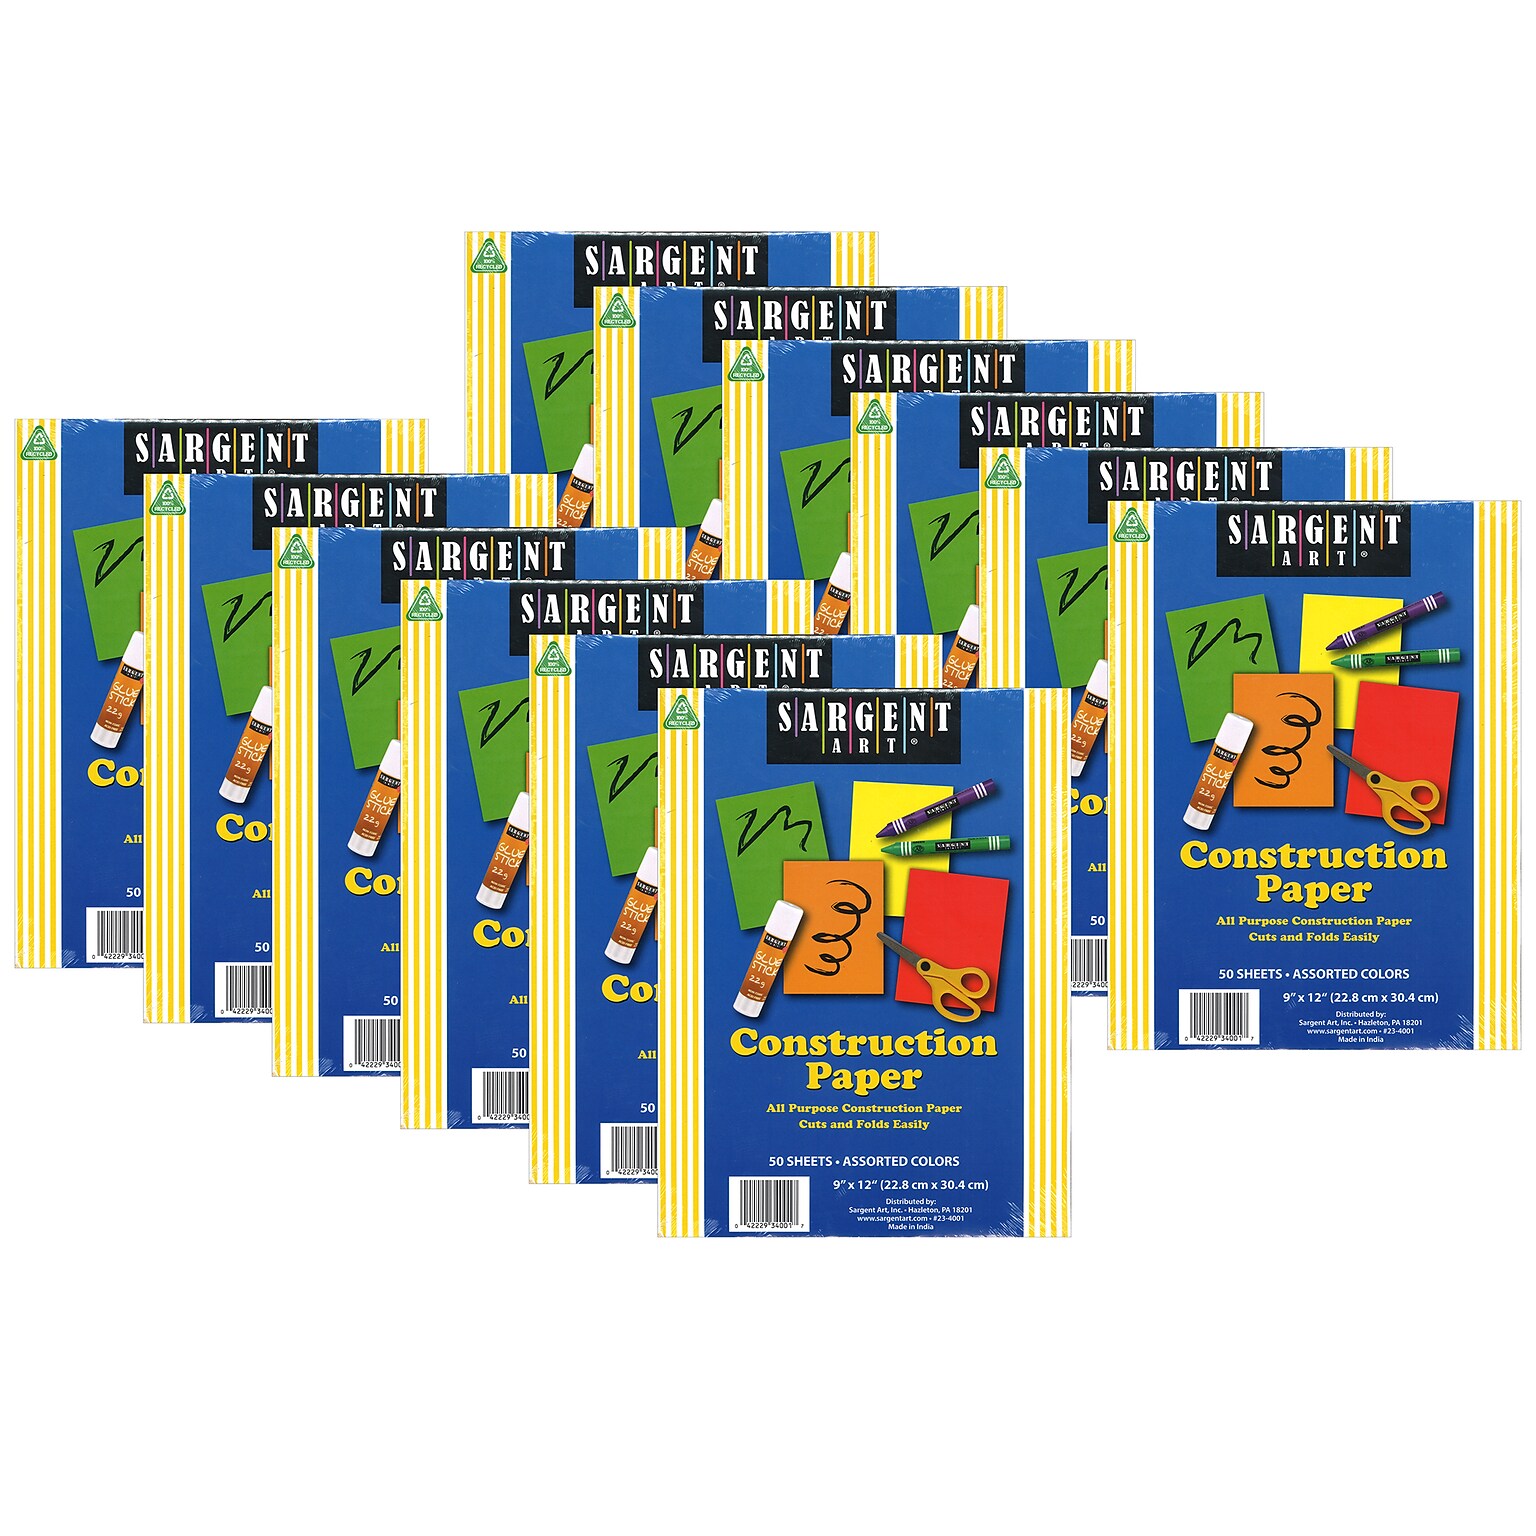 Sargent Art® Construction Paper Pack, 9 x 12, Assorted Colors, 50 Sheets Per Pack, 12 Packs (SAR234001-12)